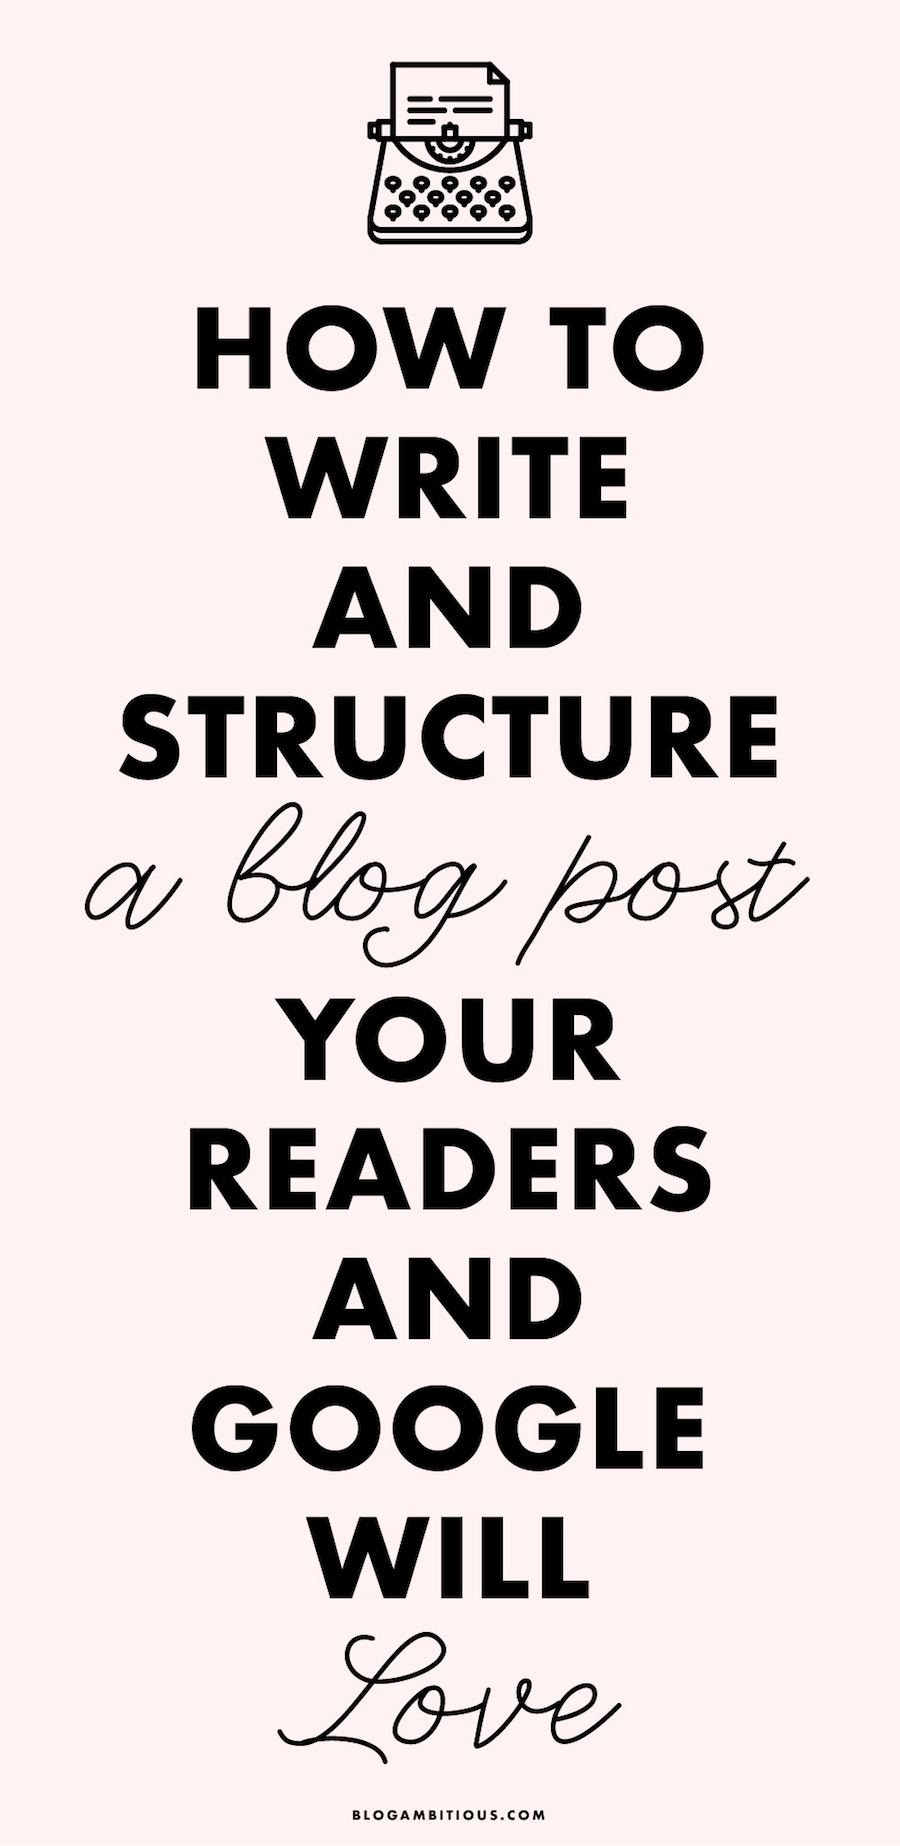 How to Write and Structure A Blog Post Your Readers and Google Will Love